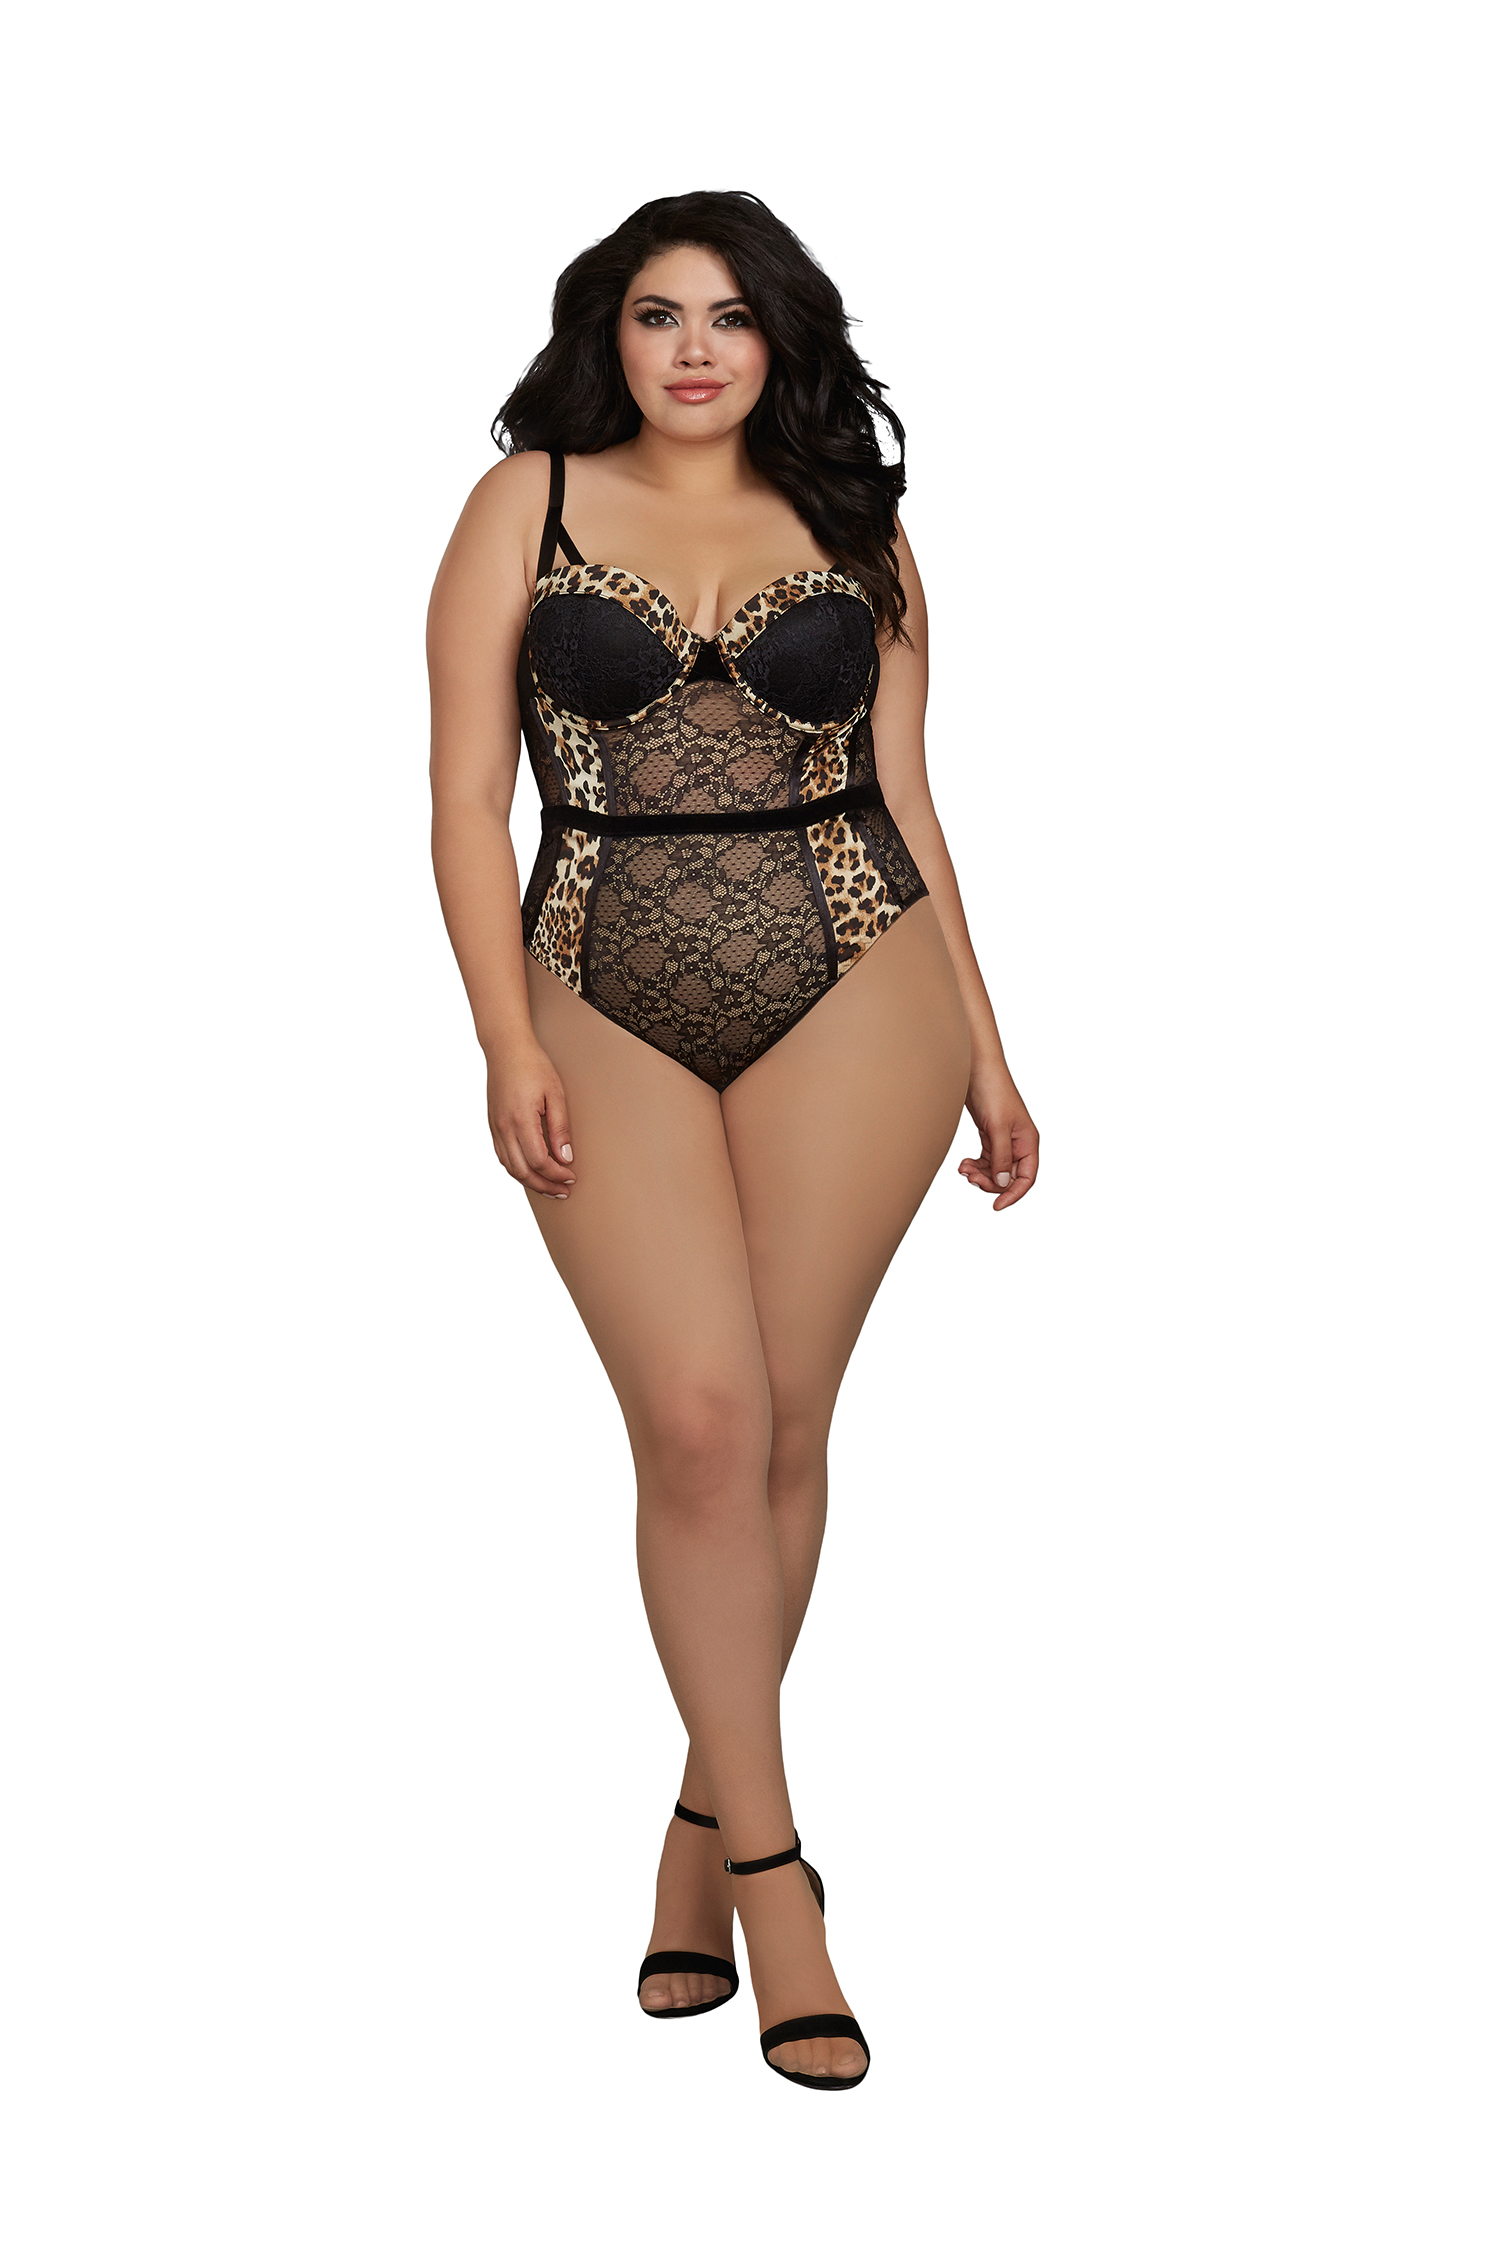 DreamGirl Womens Plus Size Microfiber Bodysuit with Chainmail Shoulder Straps Lingerie